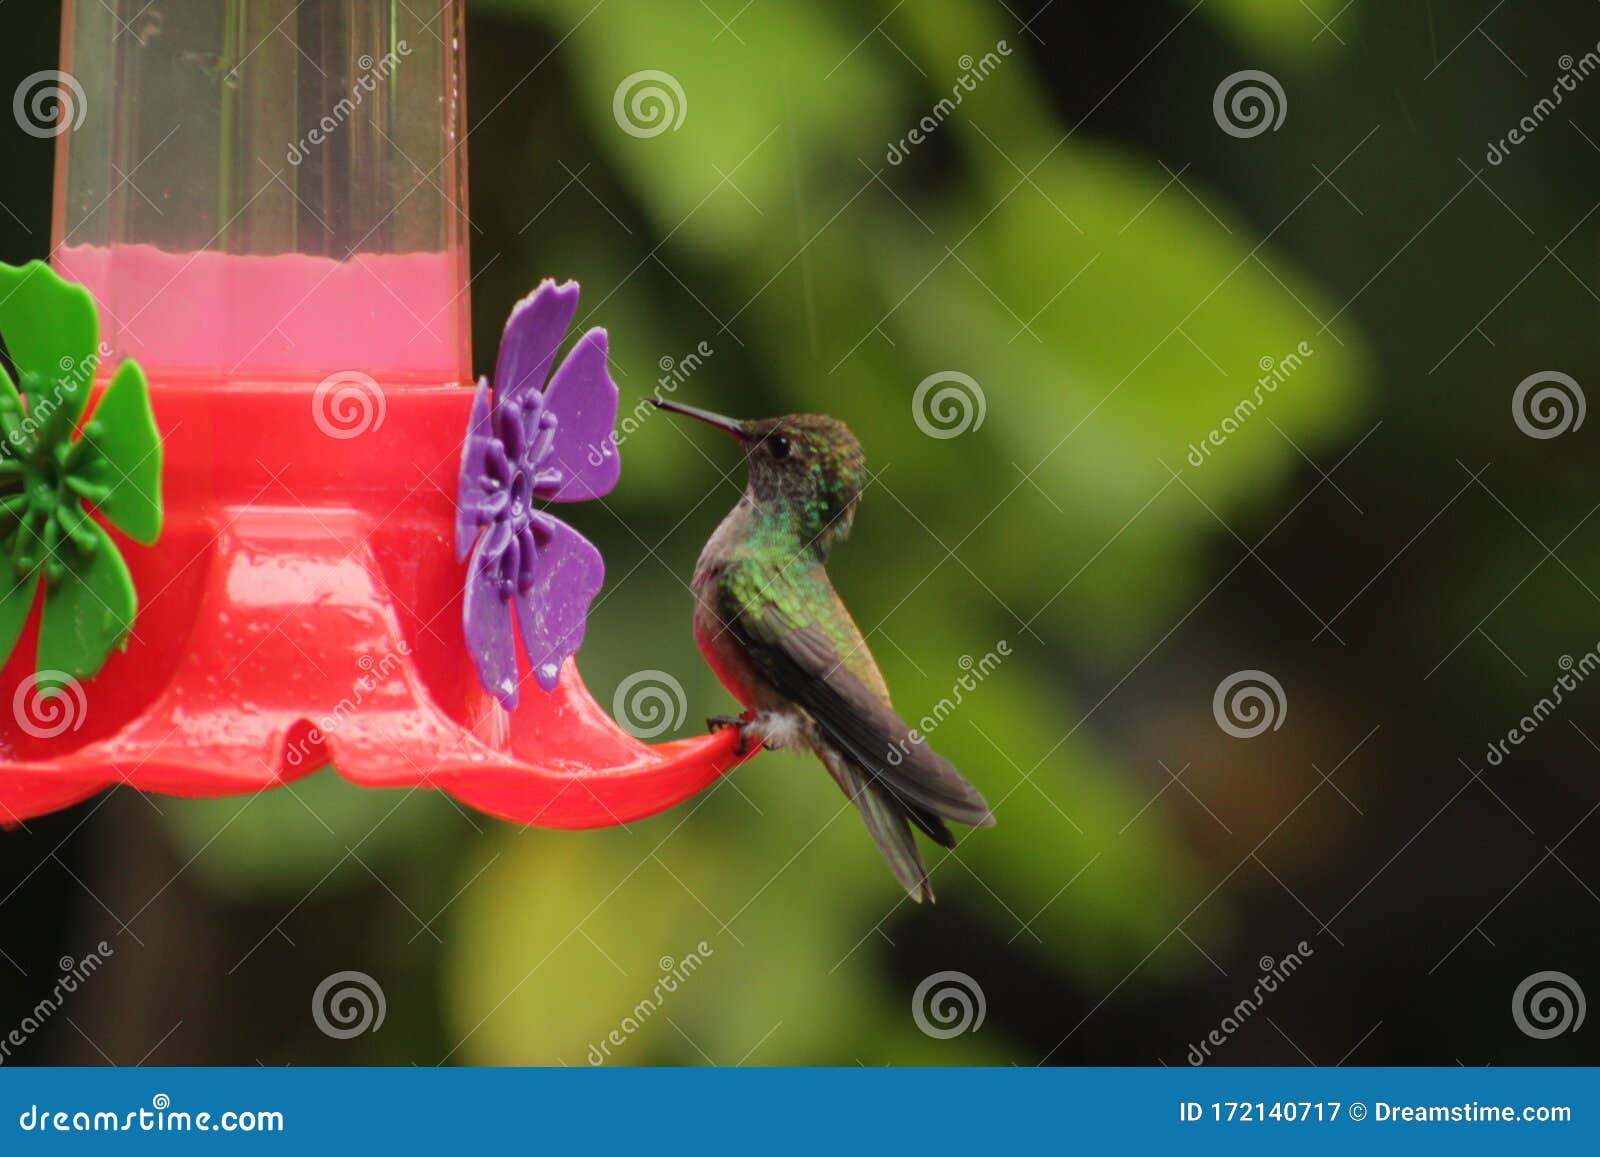 a little and cute hummingbird drinking water